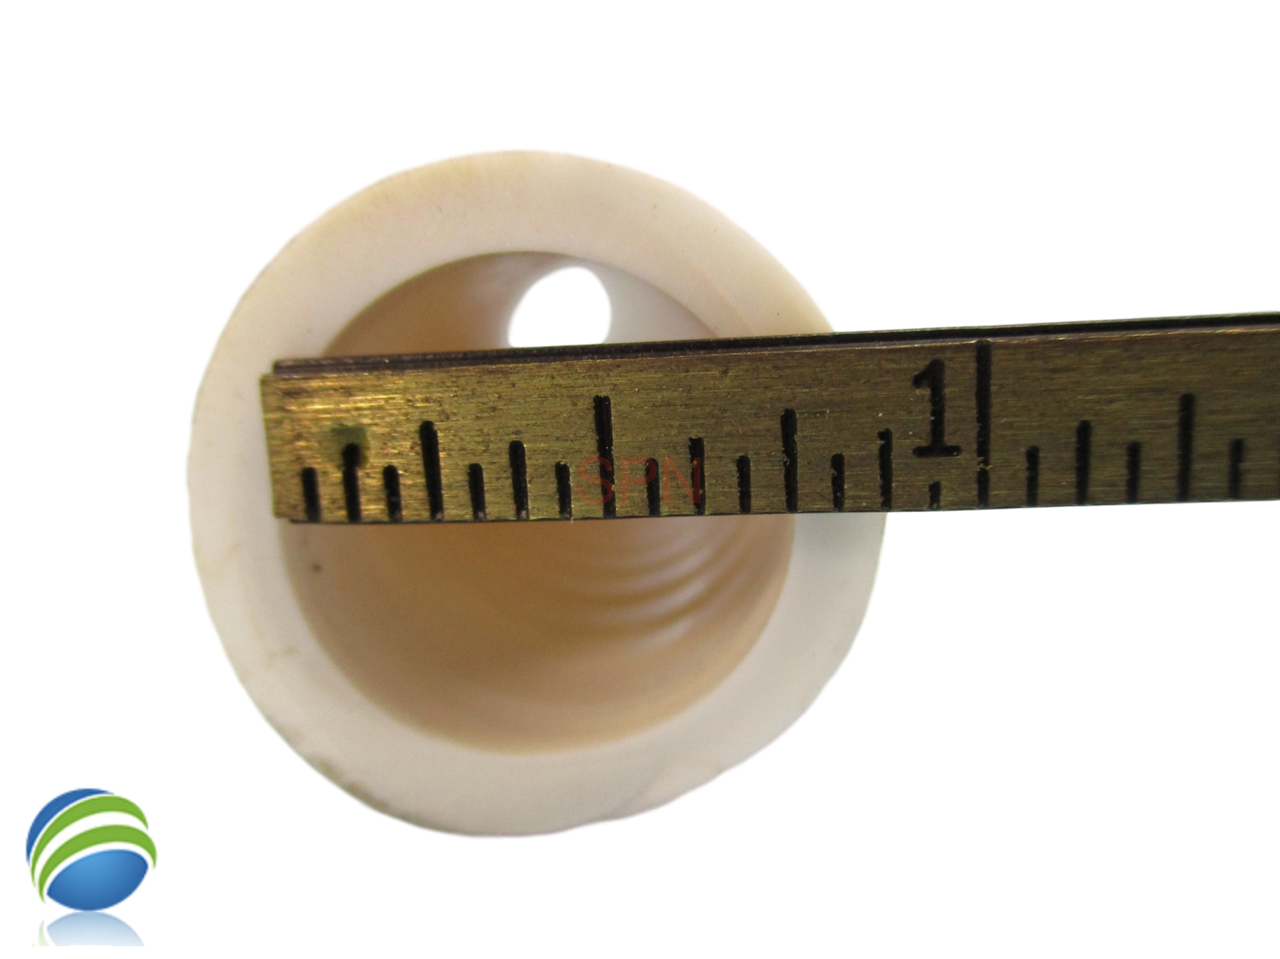 This pipe measures about 1" Outside Diameter and 3/4" Inside Diameter.